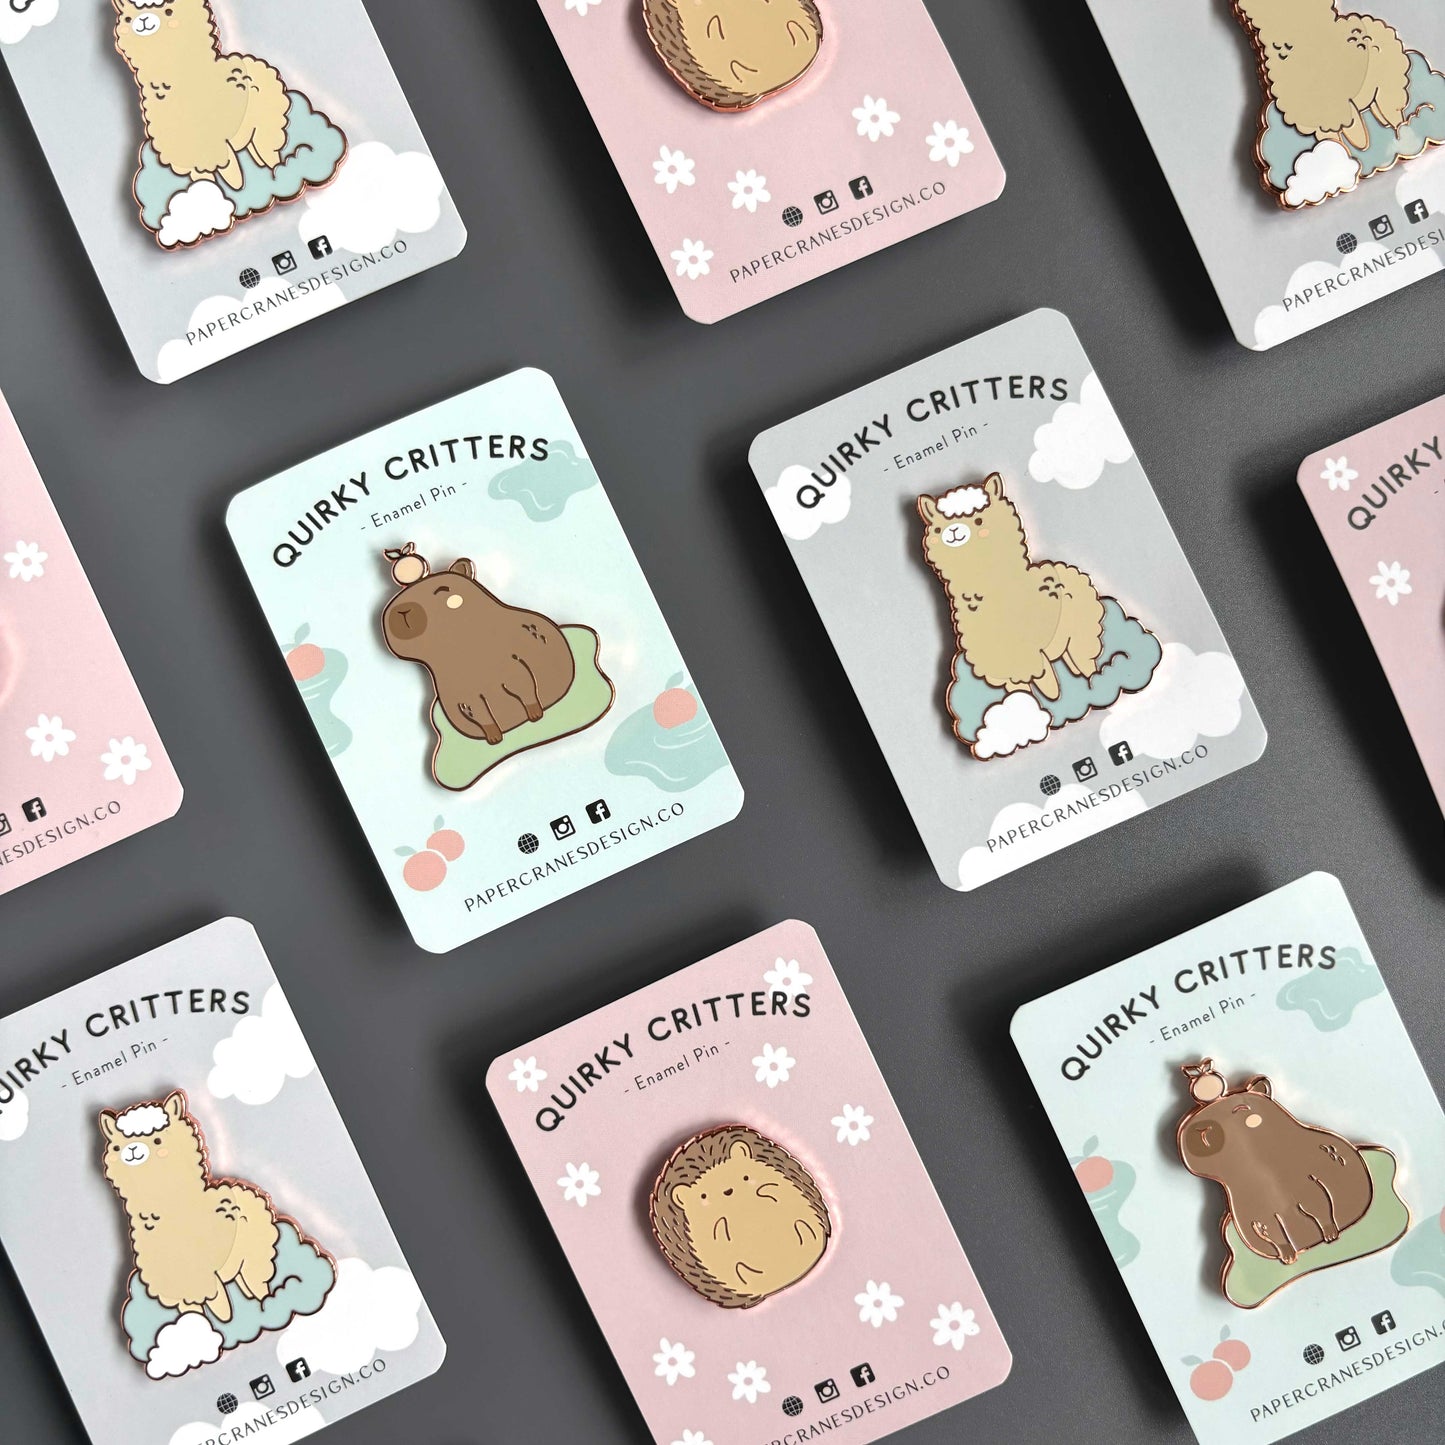 Quirky Critters Enamel Pin | Hedgehog